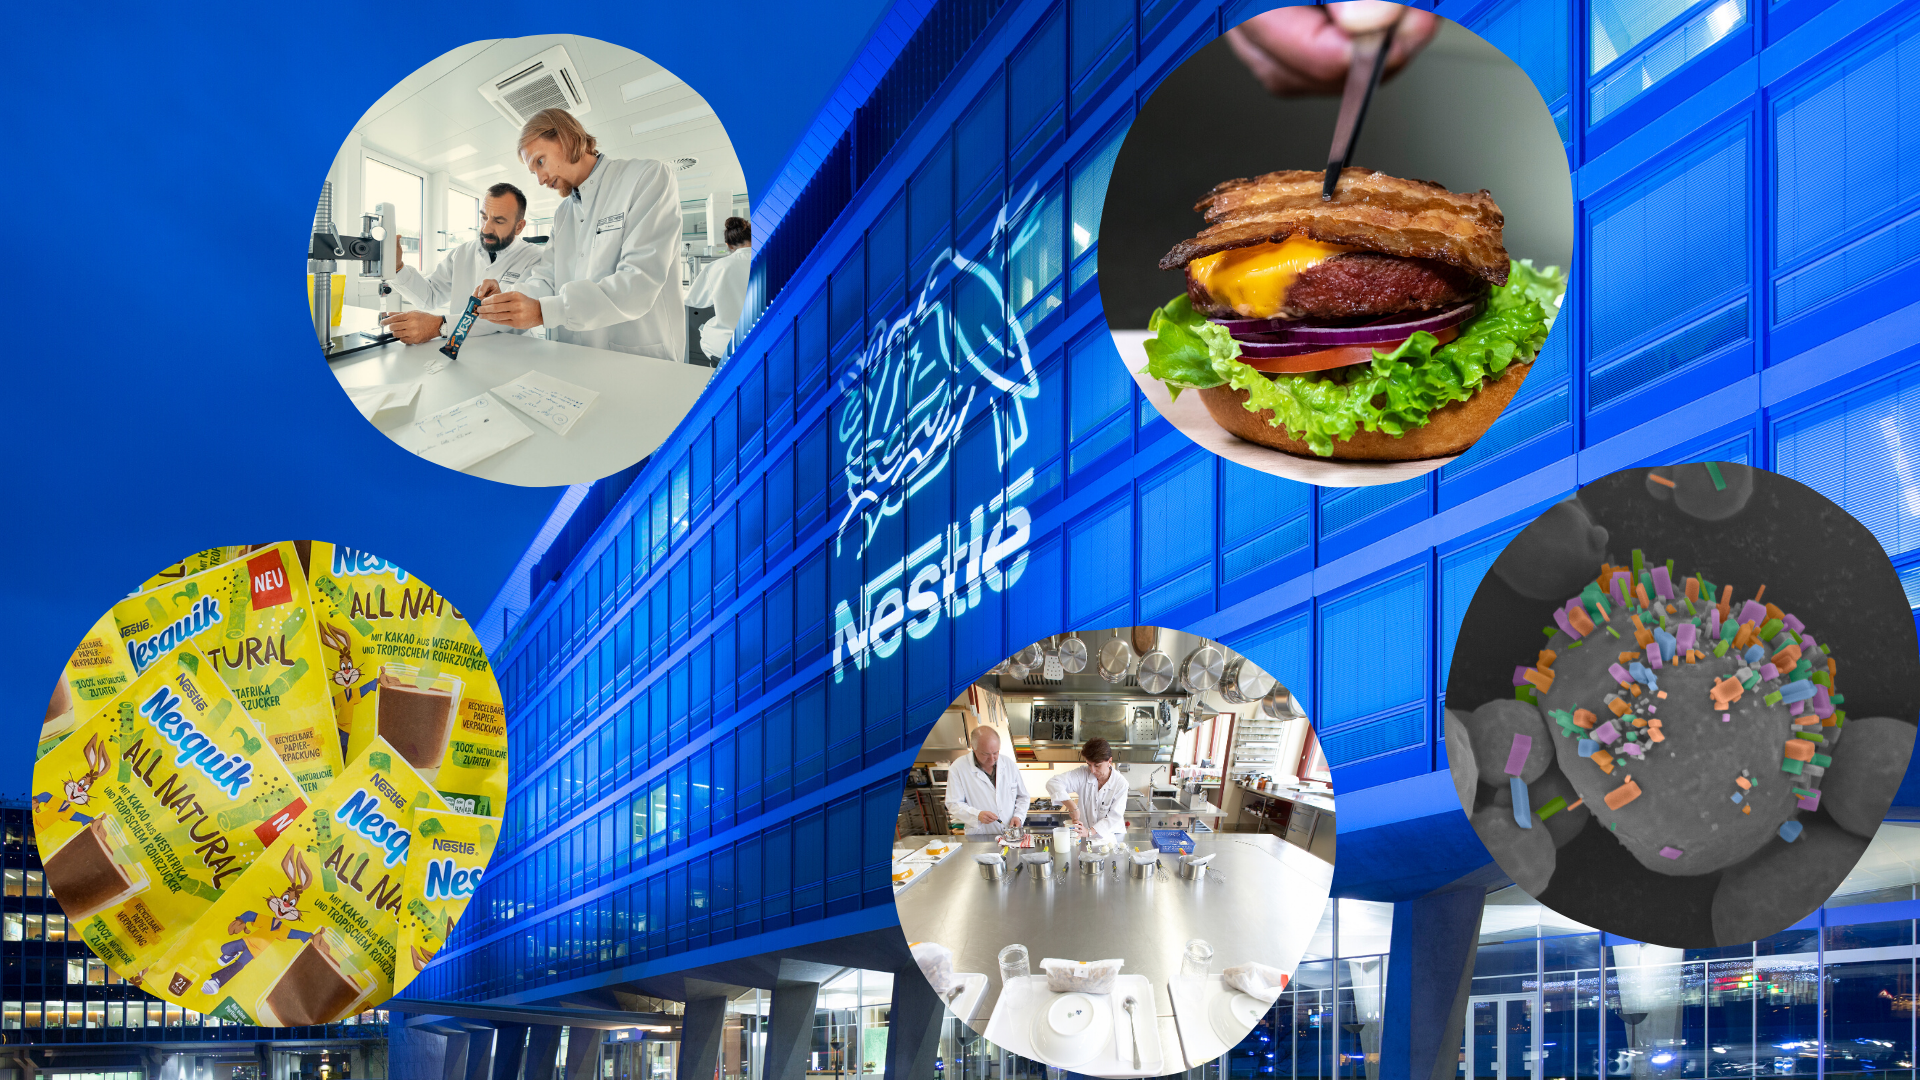 NESTLÉ: THE FUTURE OF FOOD IS NOW, THE FOOD OF THE FUTURE IS SERVED